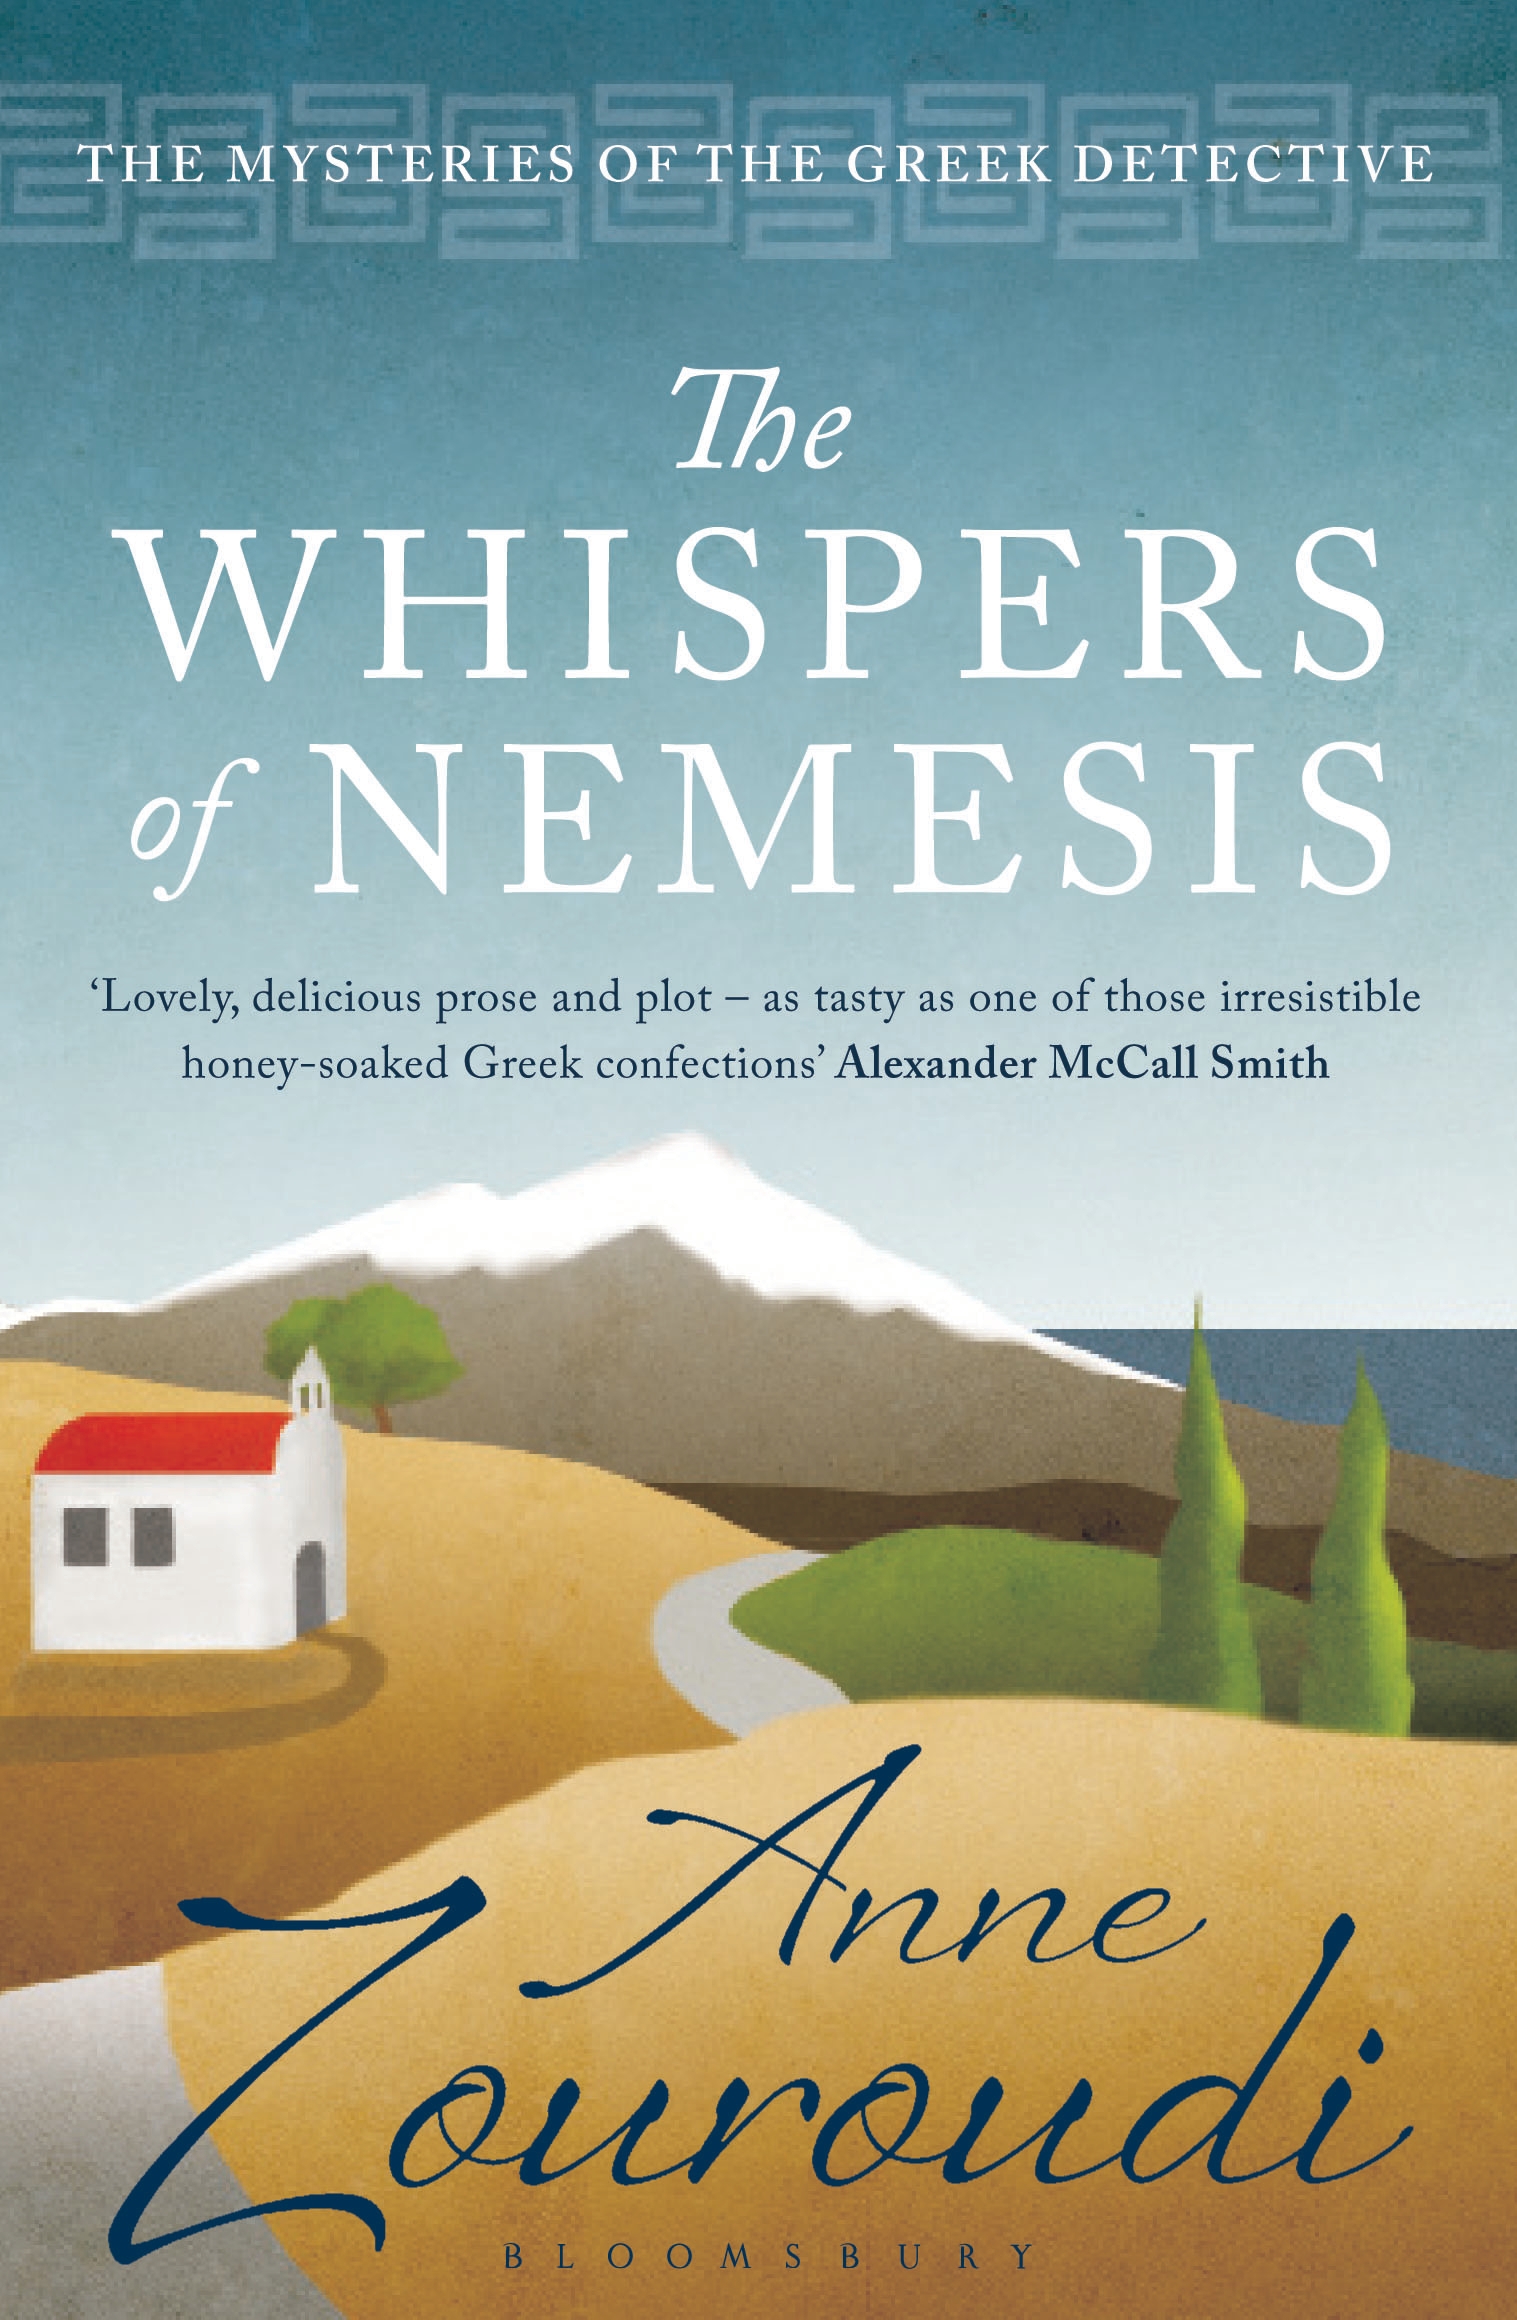 The Whispers of Nemesis (2011) by Anne Zouroudi